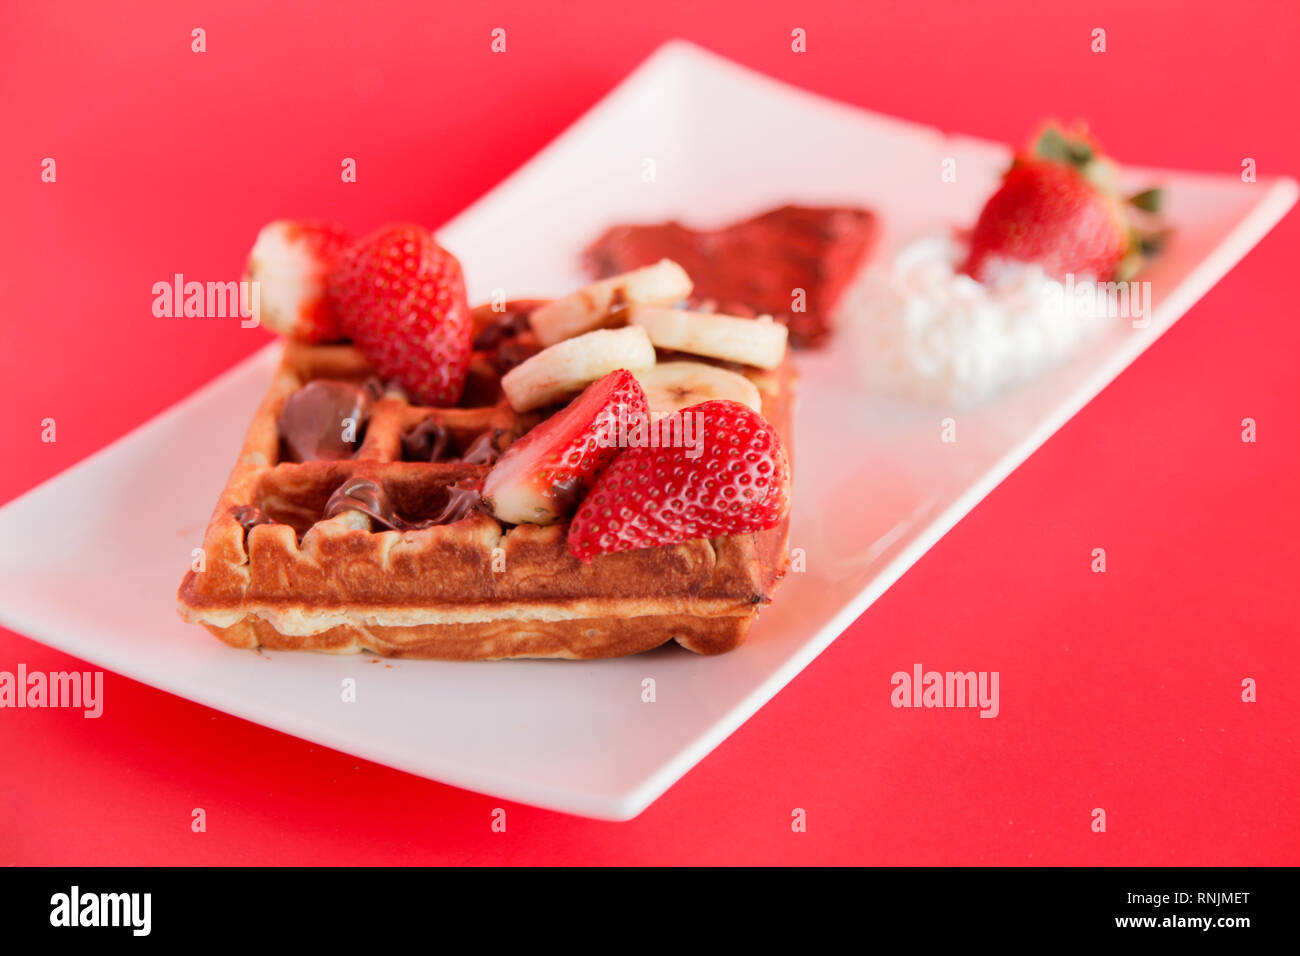 Strawberry and Banana flavour waffle with whipped cream and chocolate spread Stock Photo